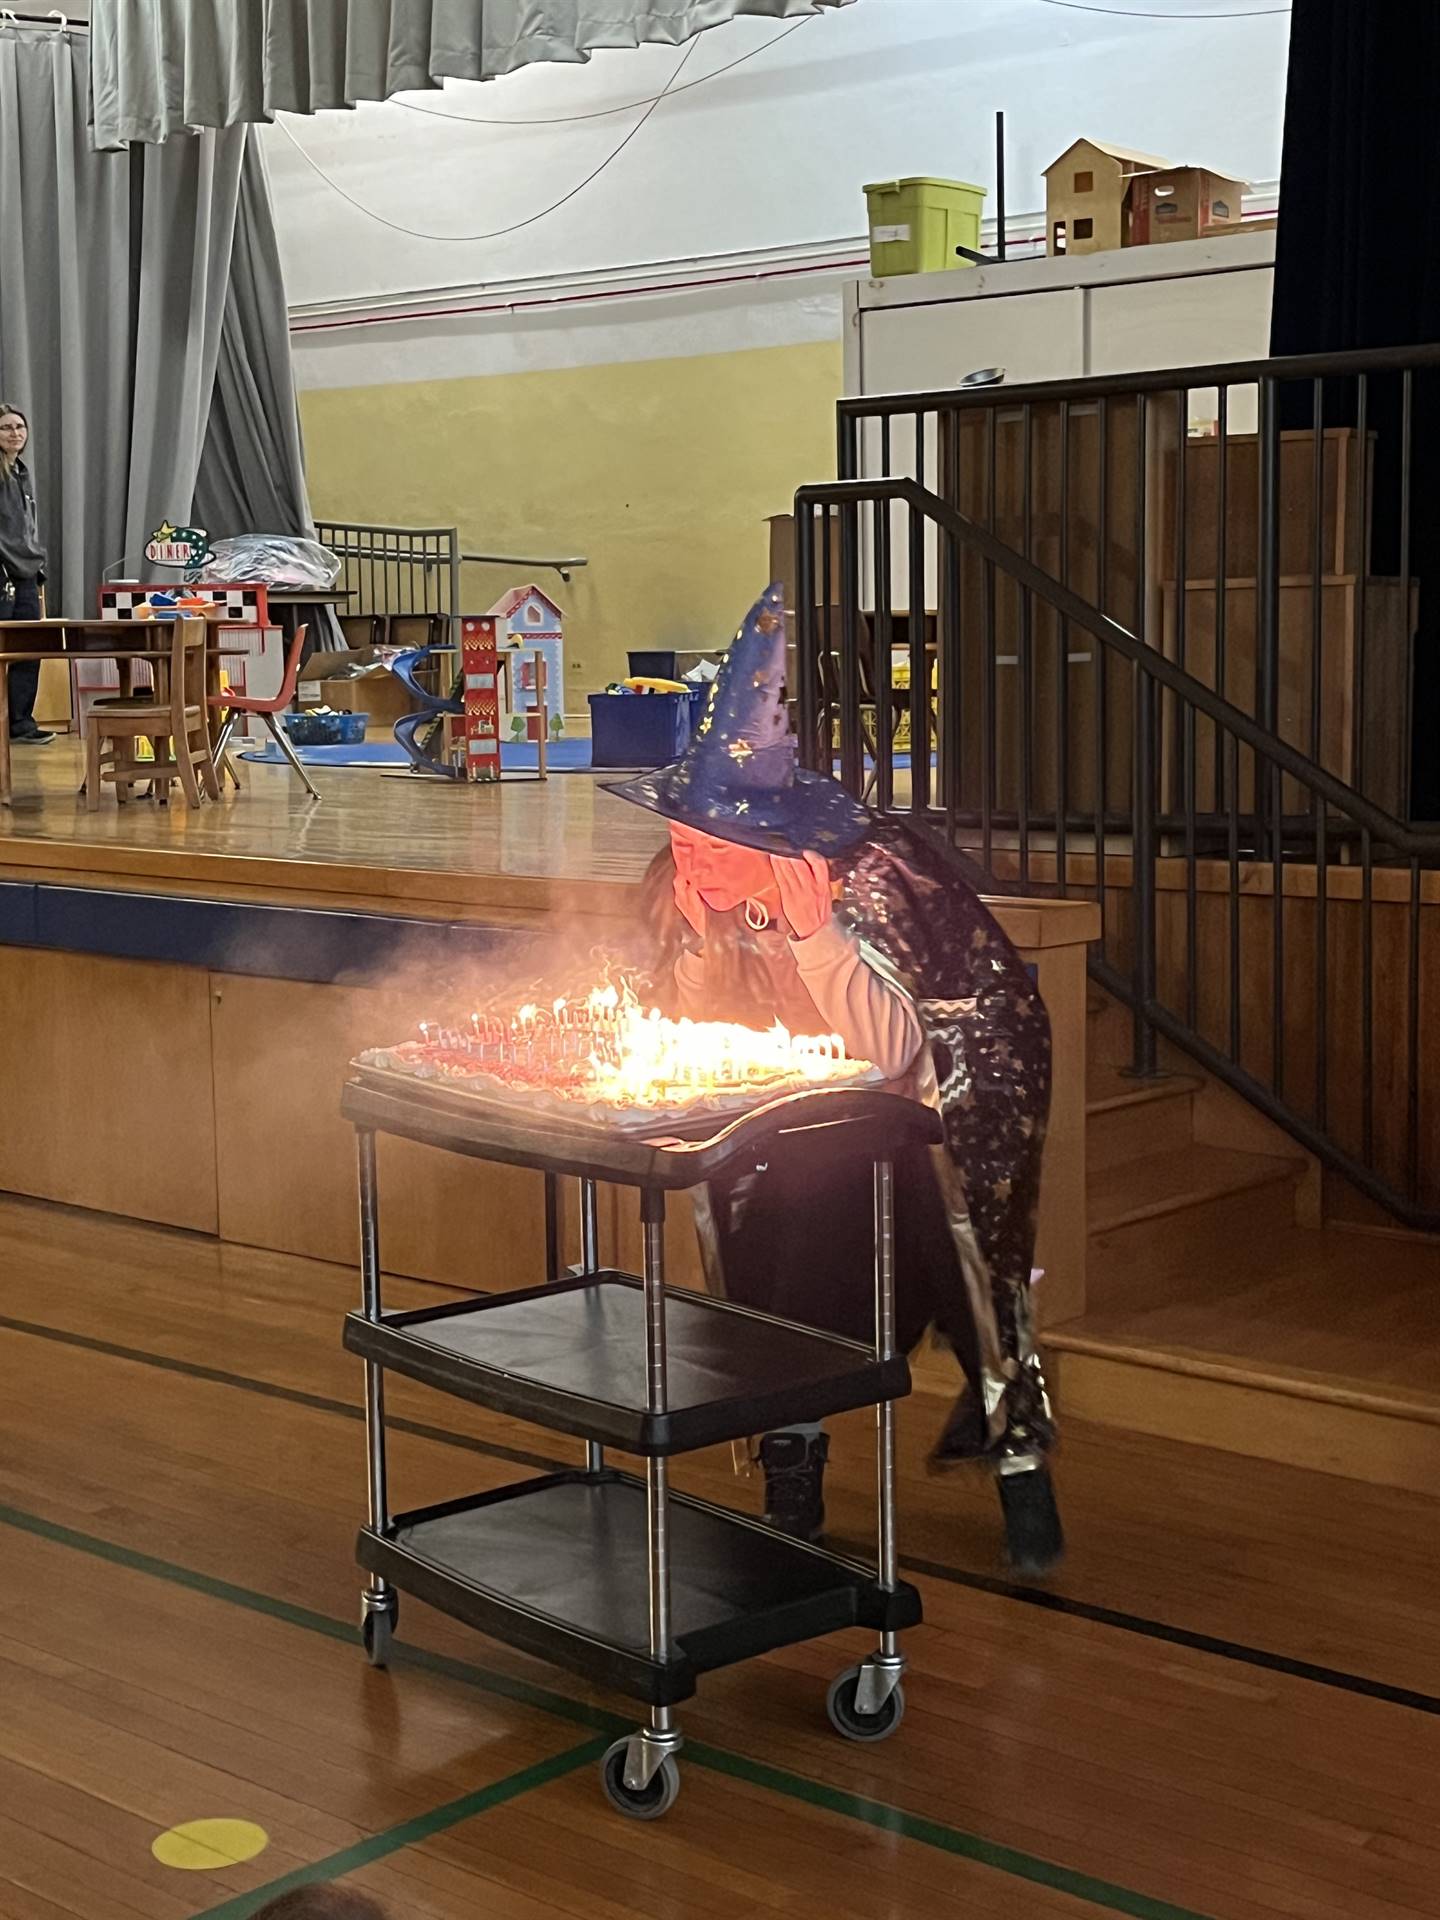 a person dressed as a wizard blowing out candles.